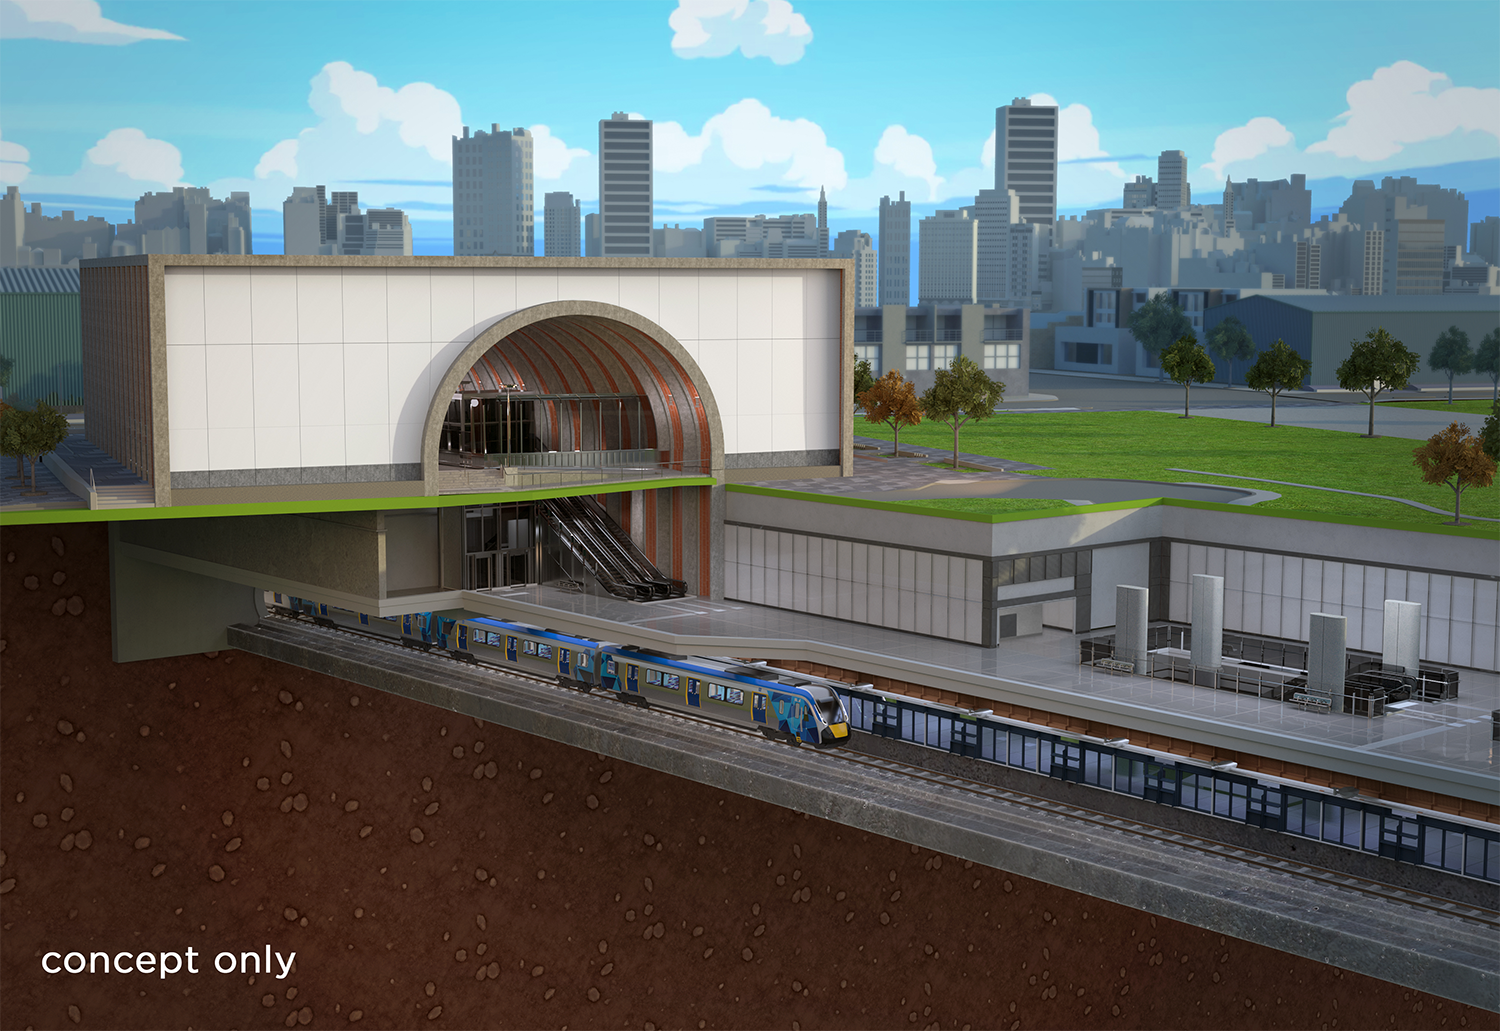 Concept render of Arden station showing entrance arches and underground station.